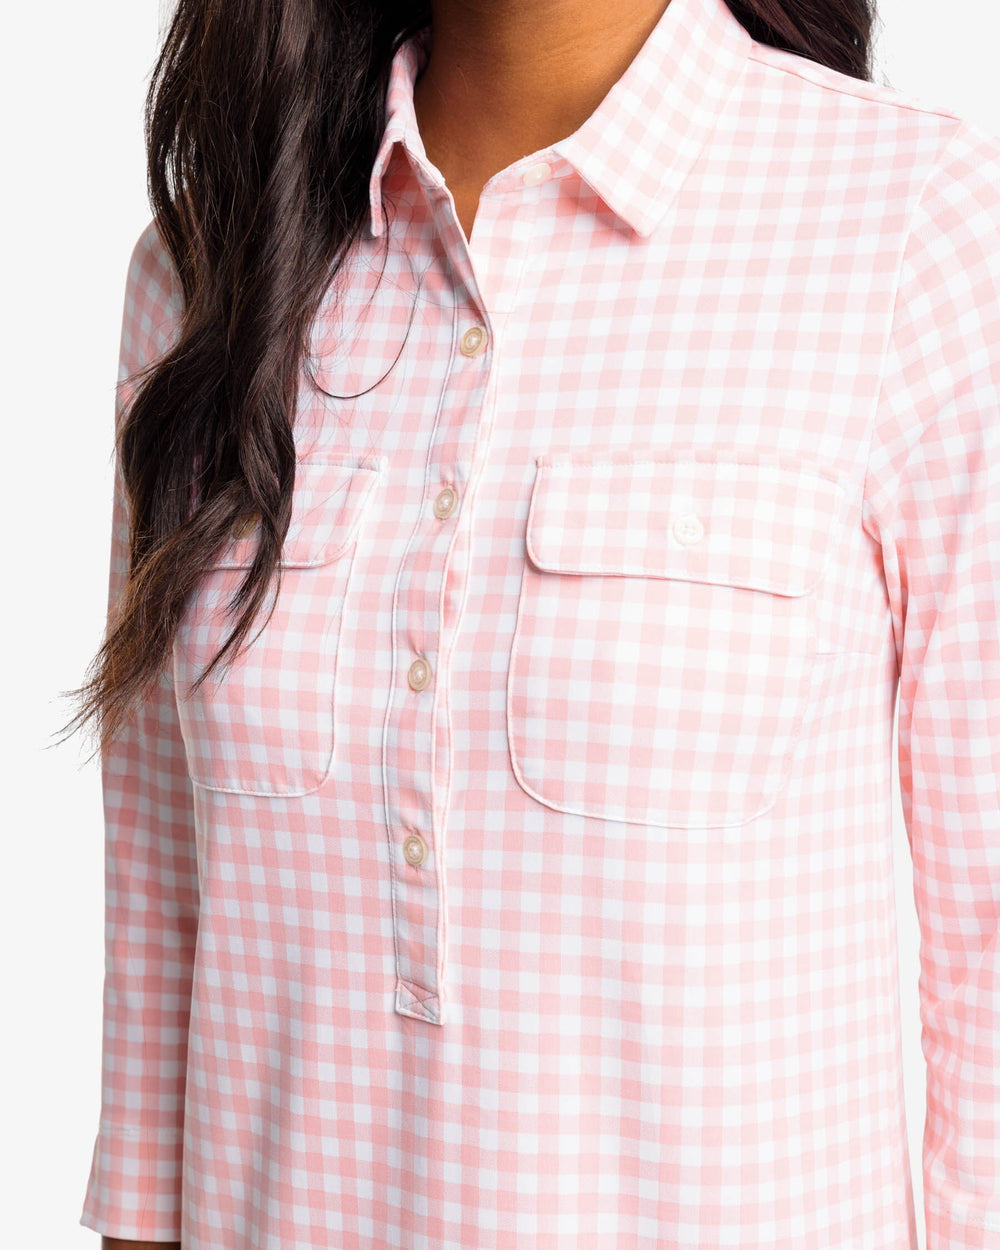 The detail view of the Southern Tide Jessica Gingham Performance Dress by Southern Tide - Quartz Pink